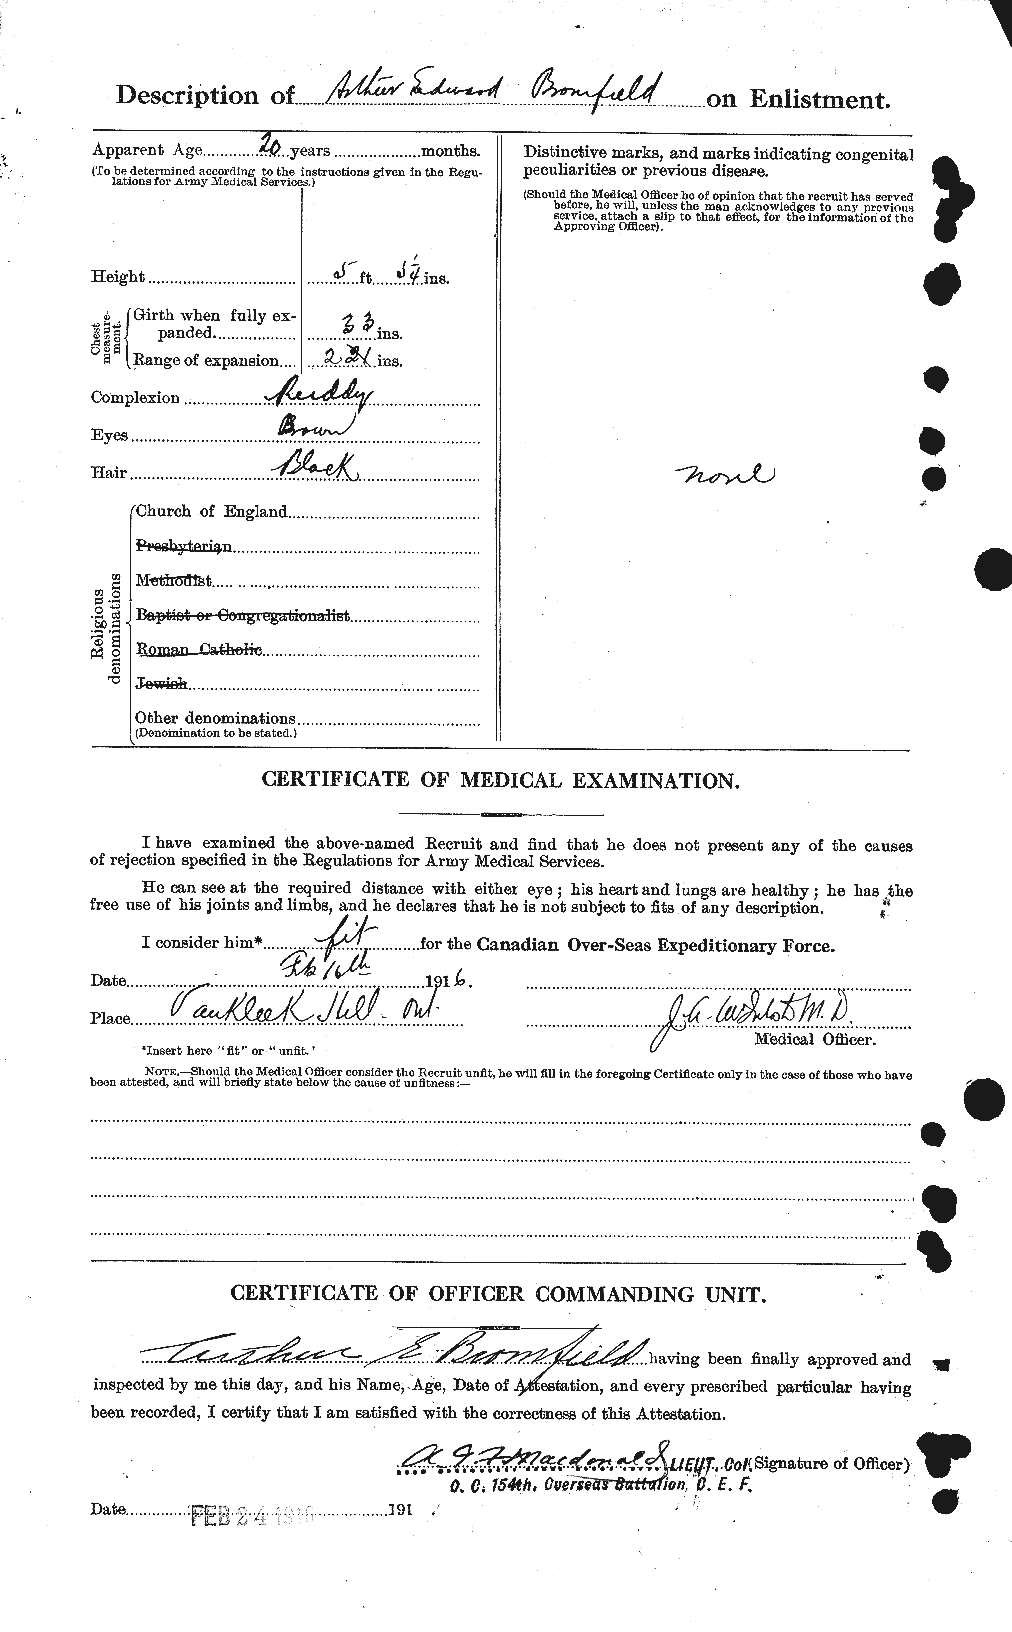 Personnel Records of the First World War - CEF 264825b